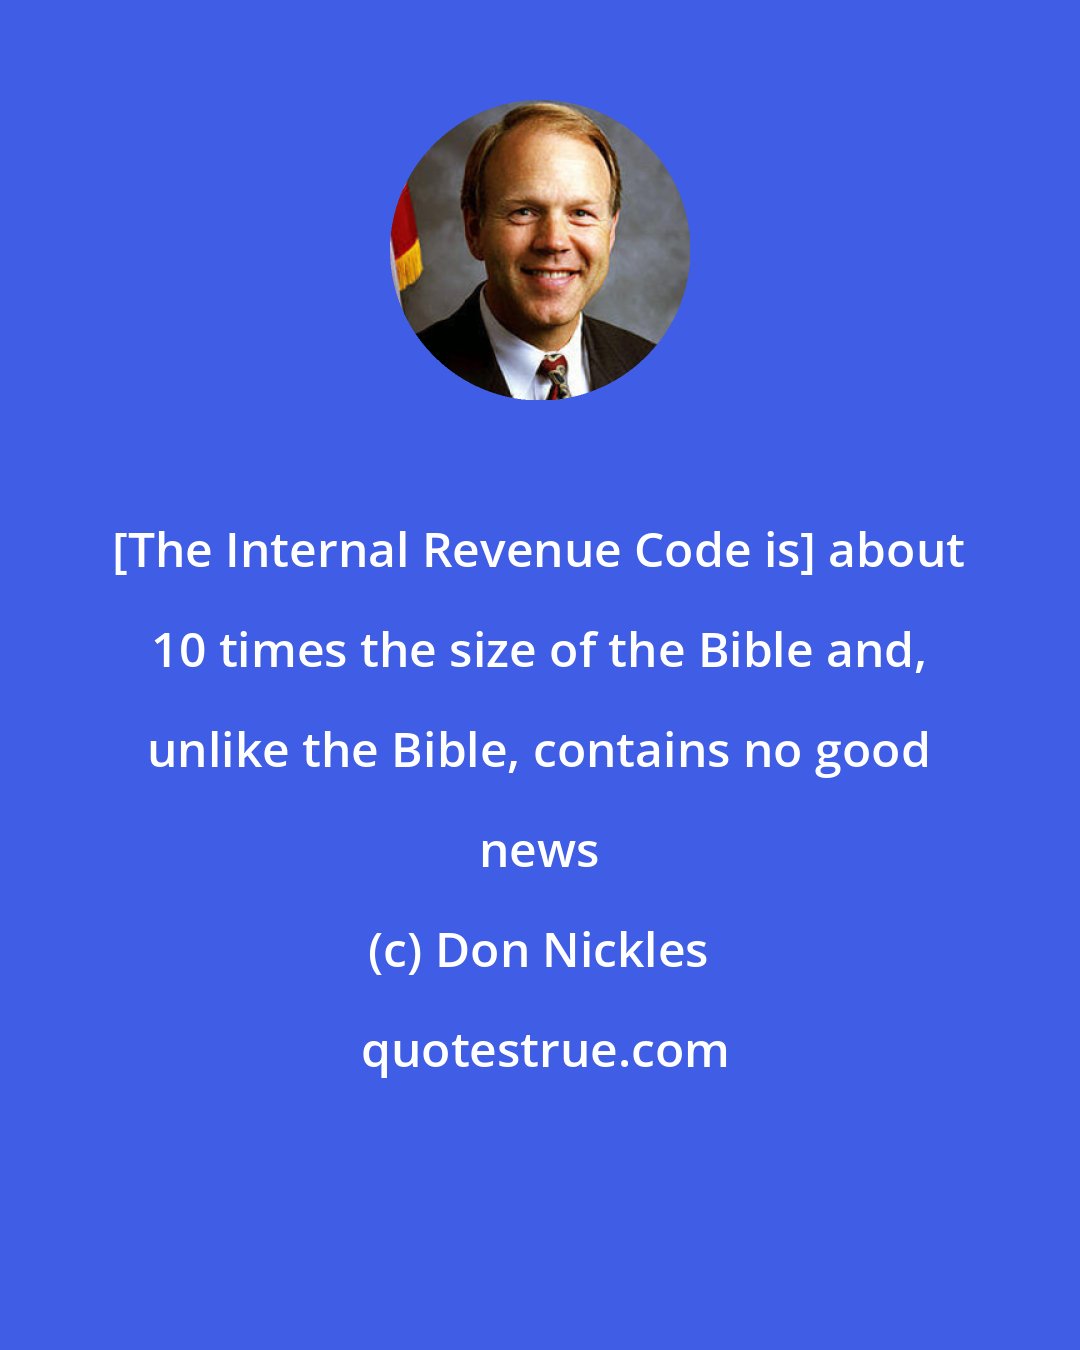 Don Nickles: [The Internal Revenue Code is] about 10 times the size of the Bible and, unlike the Bible, contains no good news